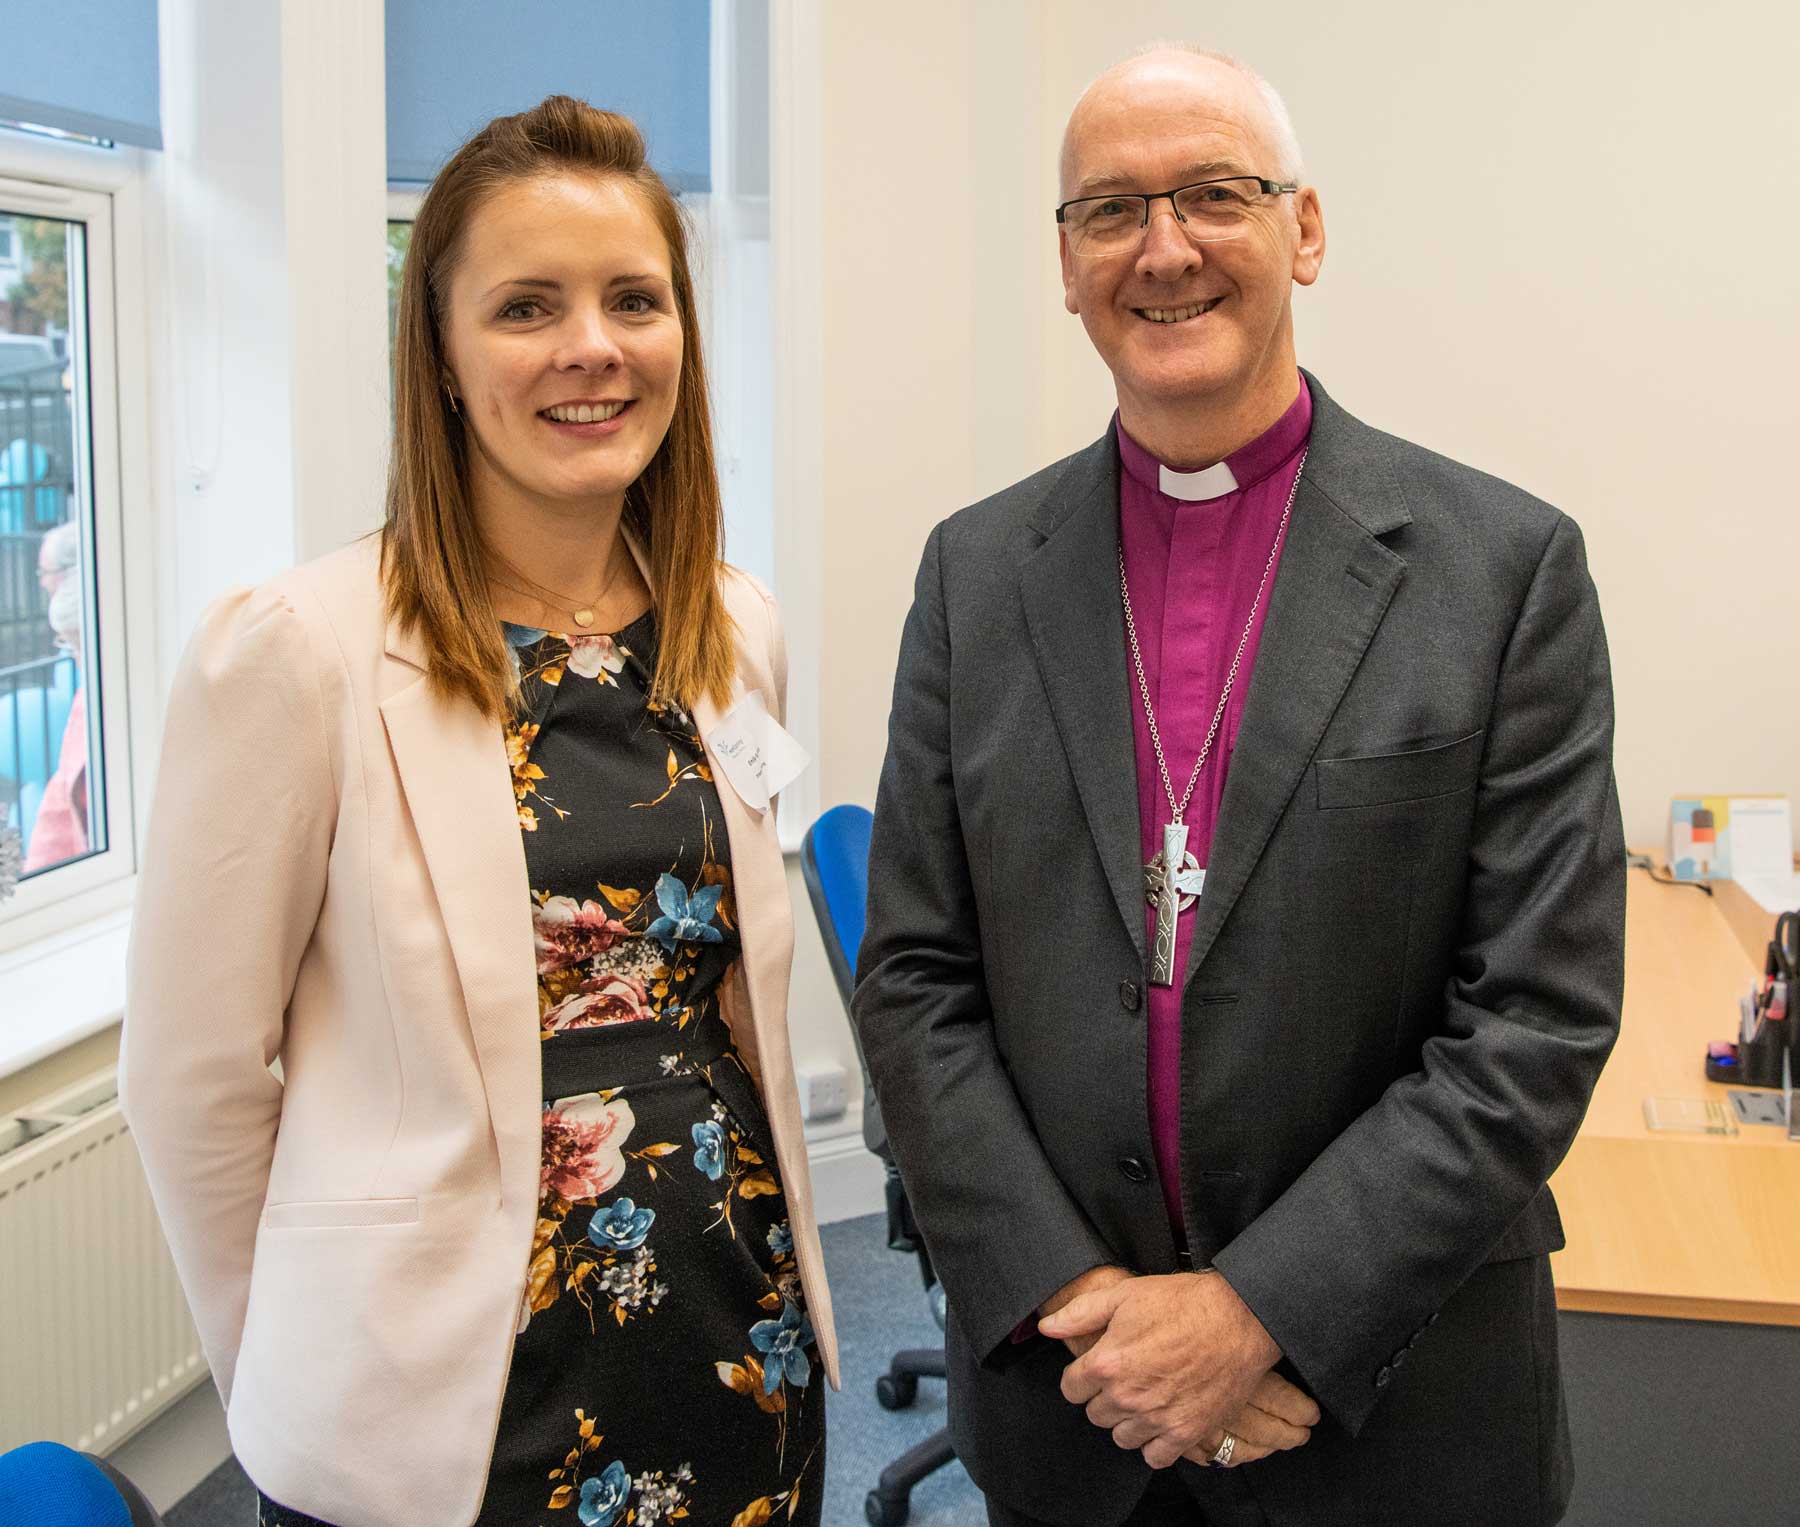 Emily Fullarton with the Bishop of Leeds, the Rt Rev Nick Baines